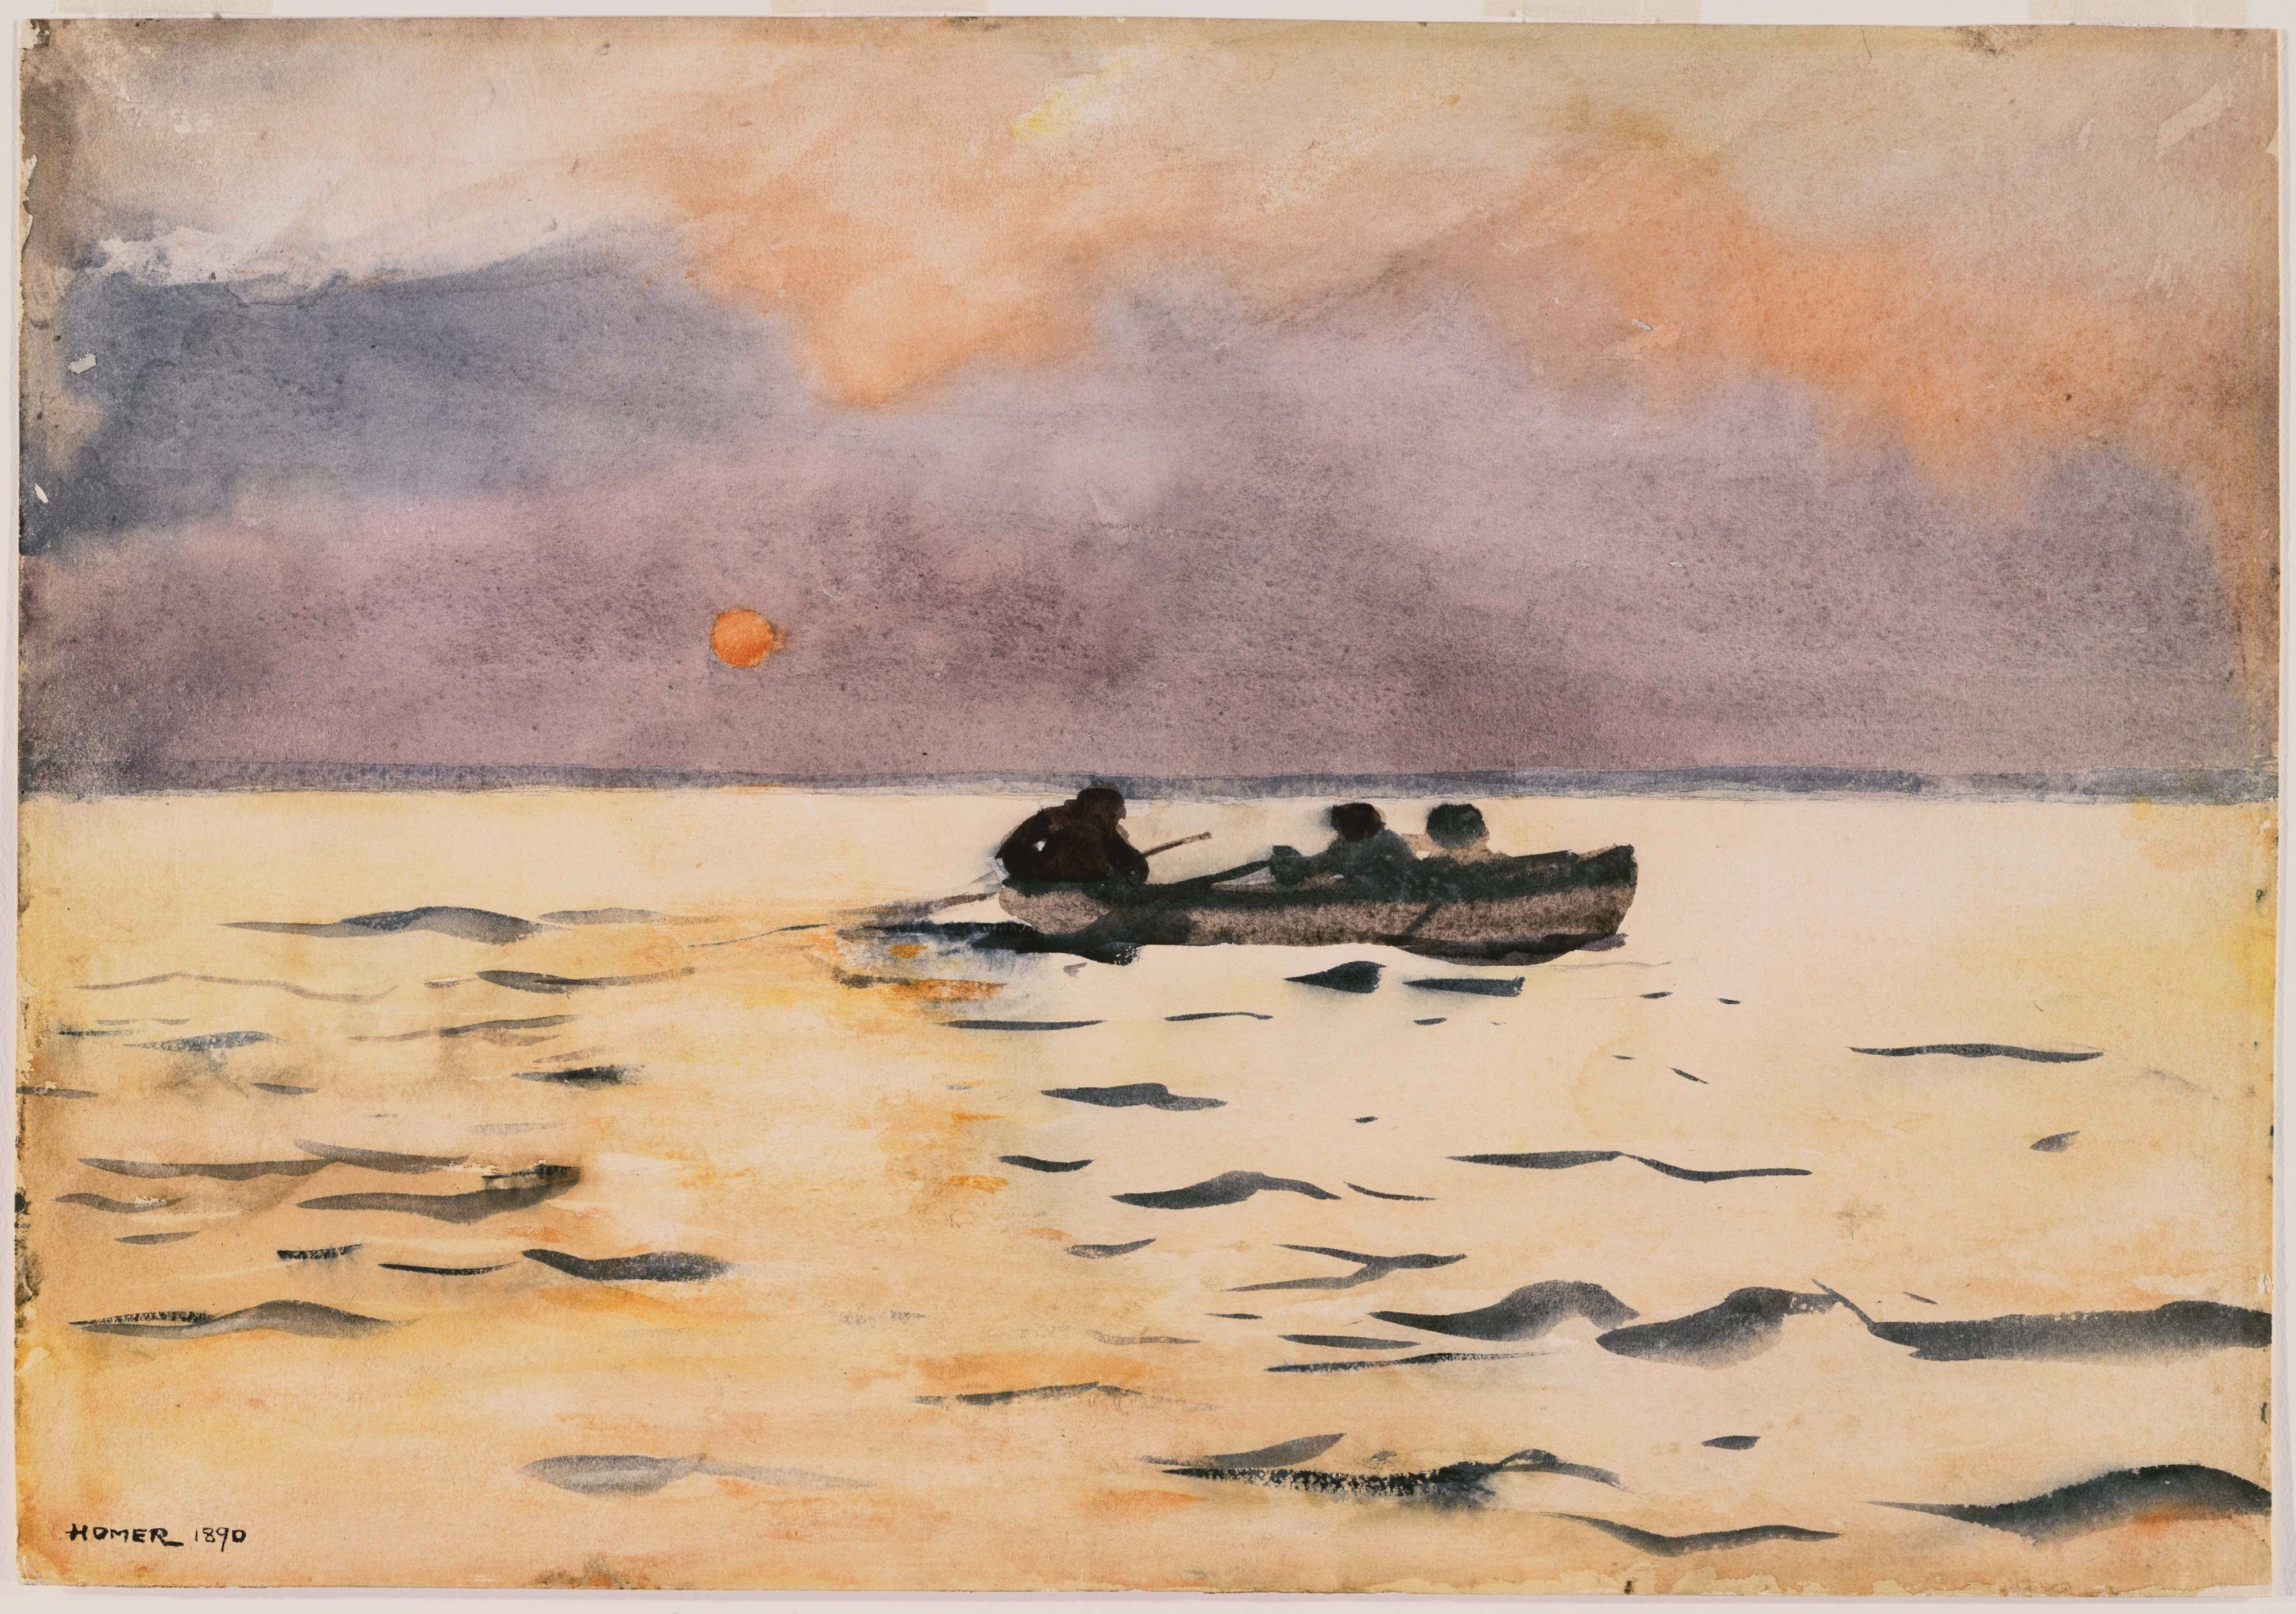 Watercolor painting of rowers by Winslow Homer. Orange tones and a sunset scene. Rowing art.